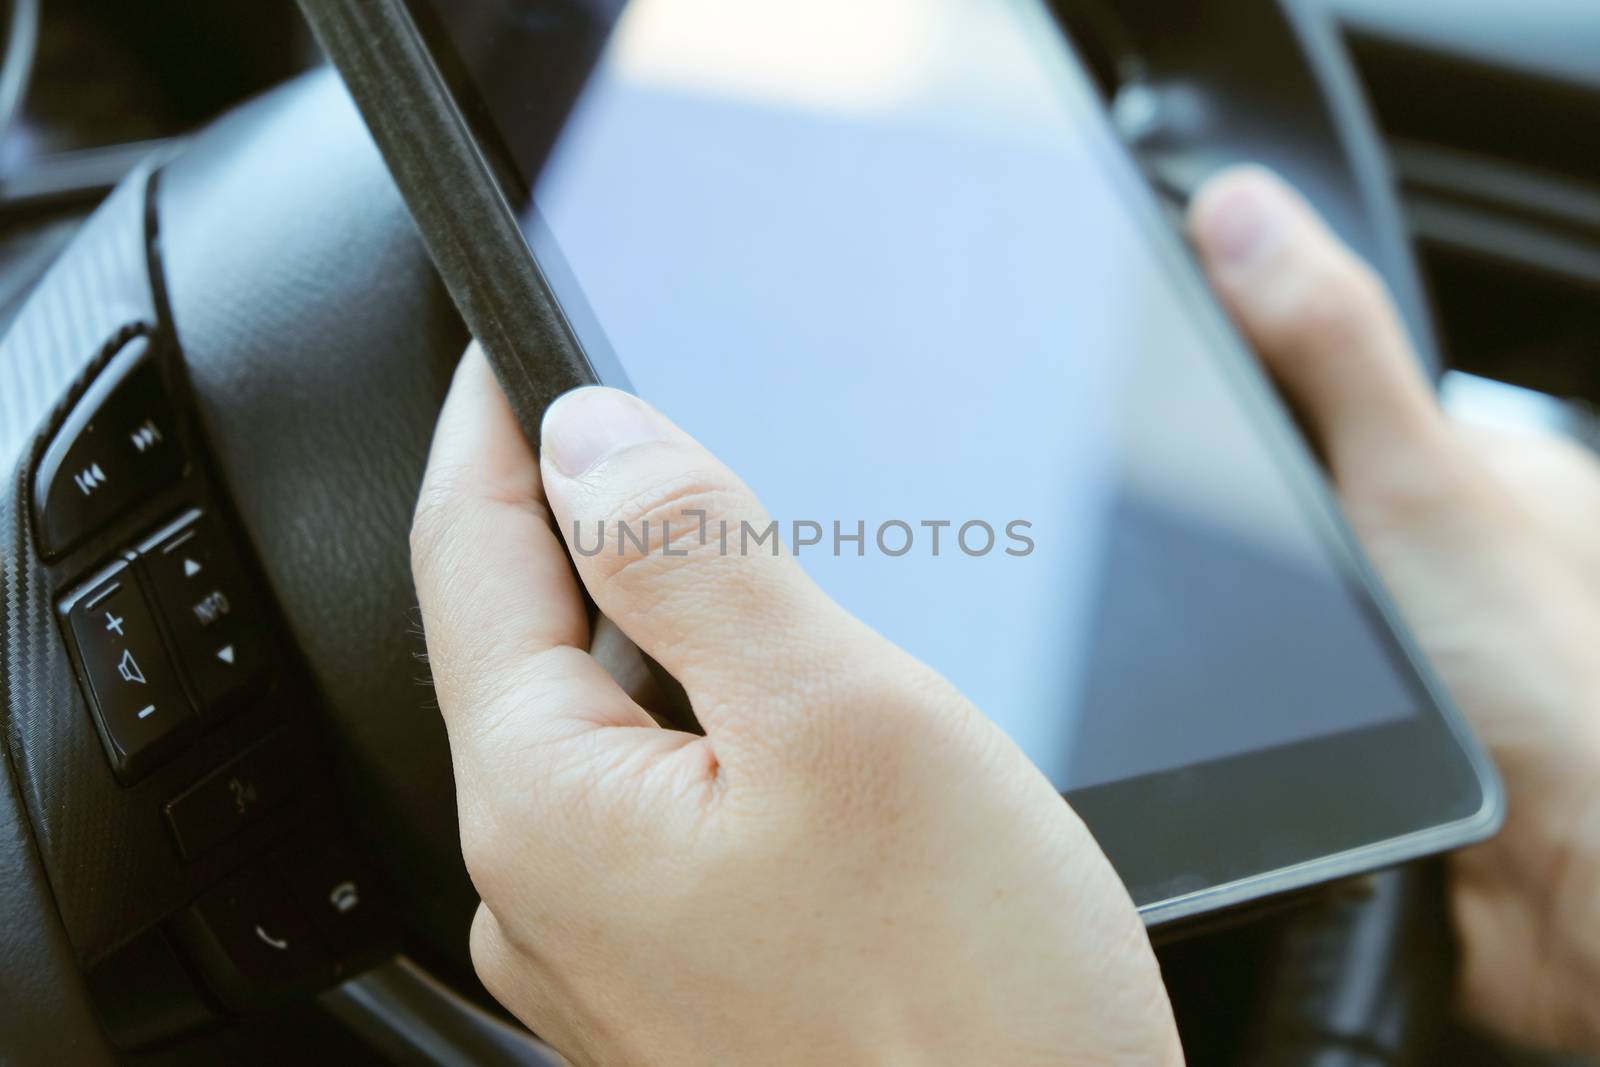 image of using a digital tablet inside of a car.